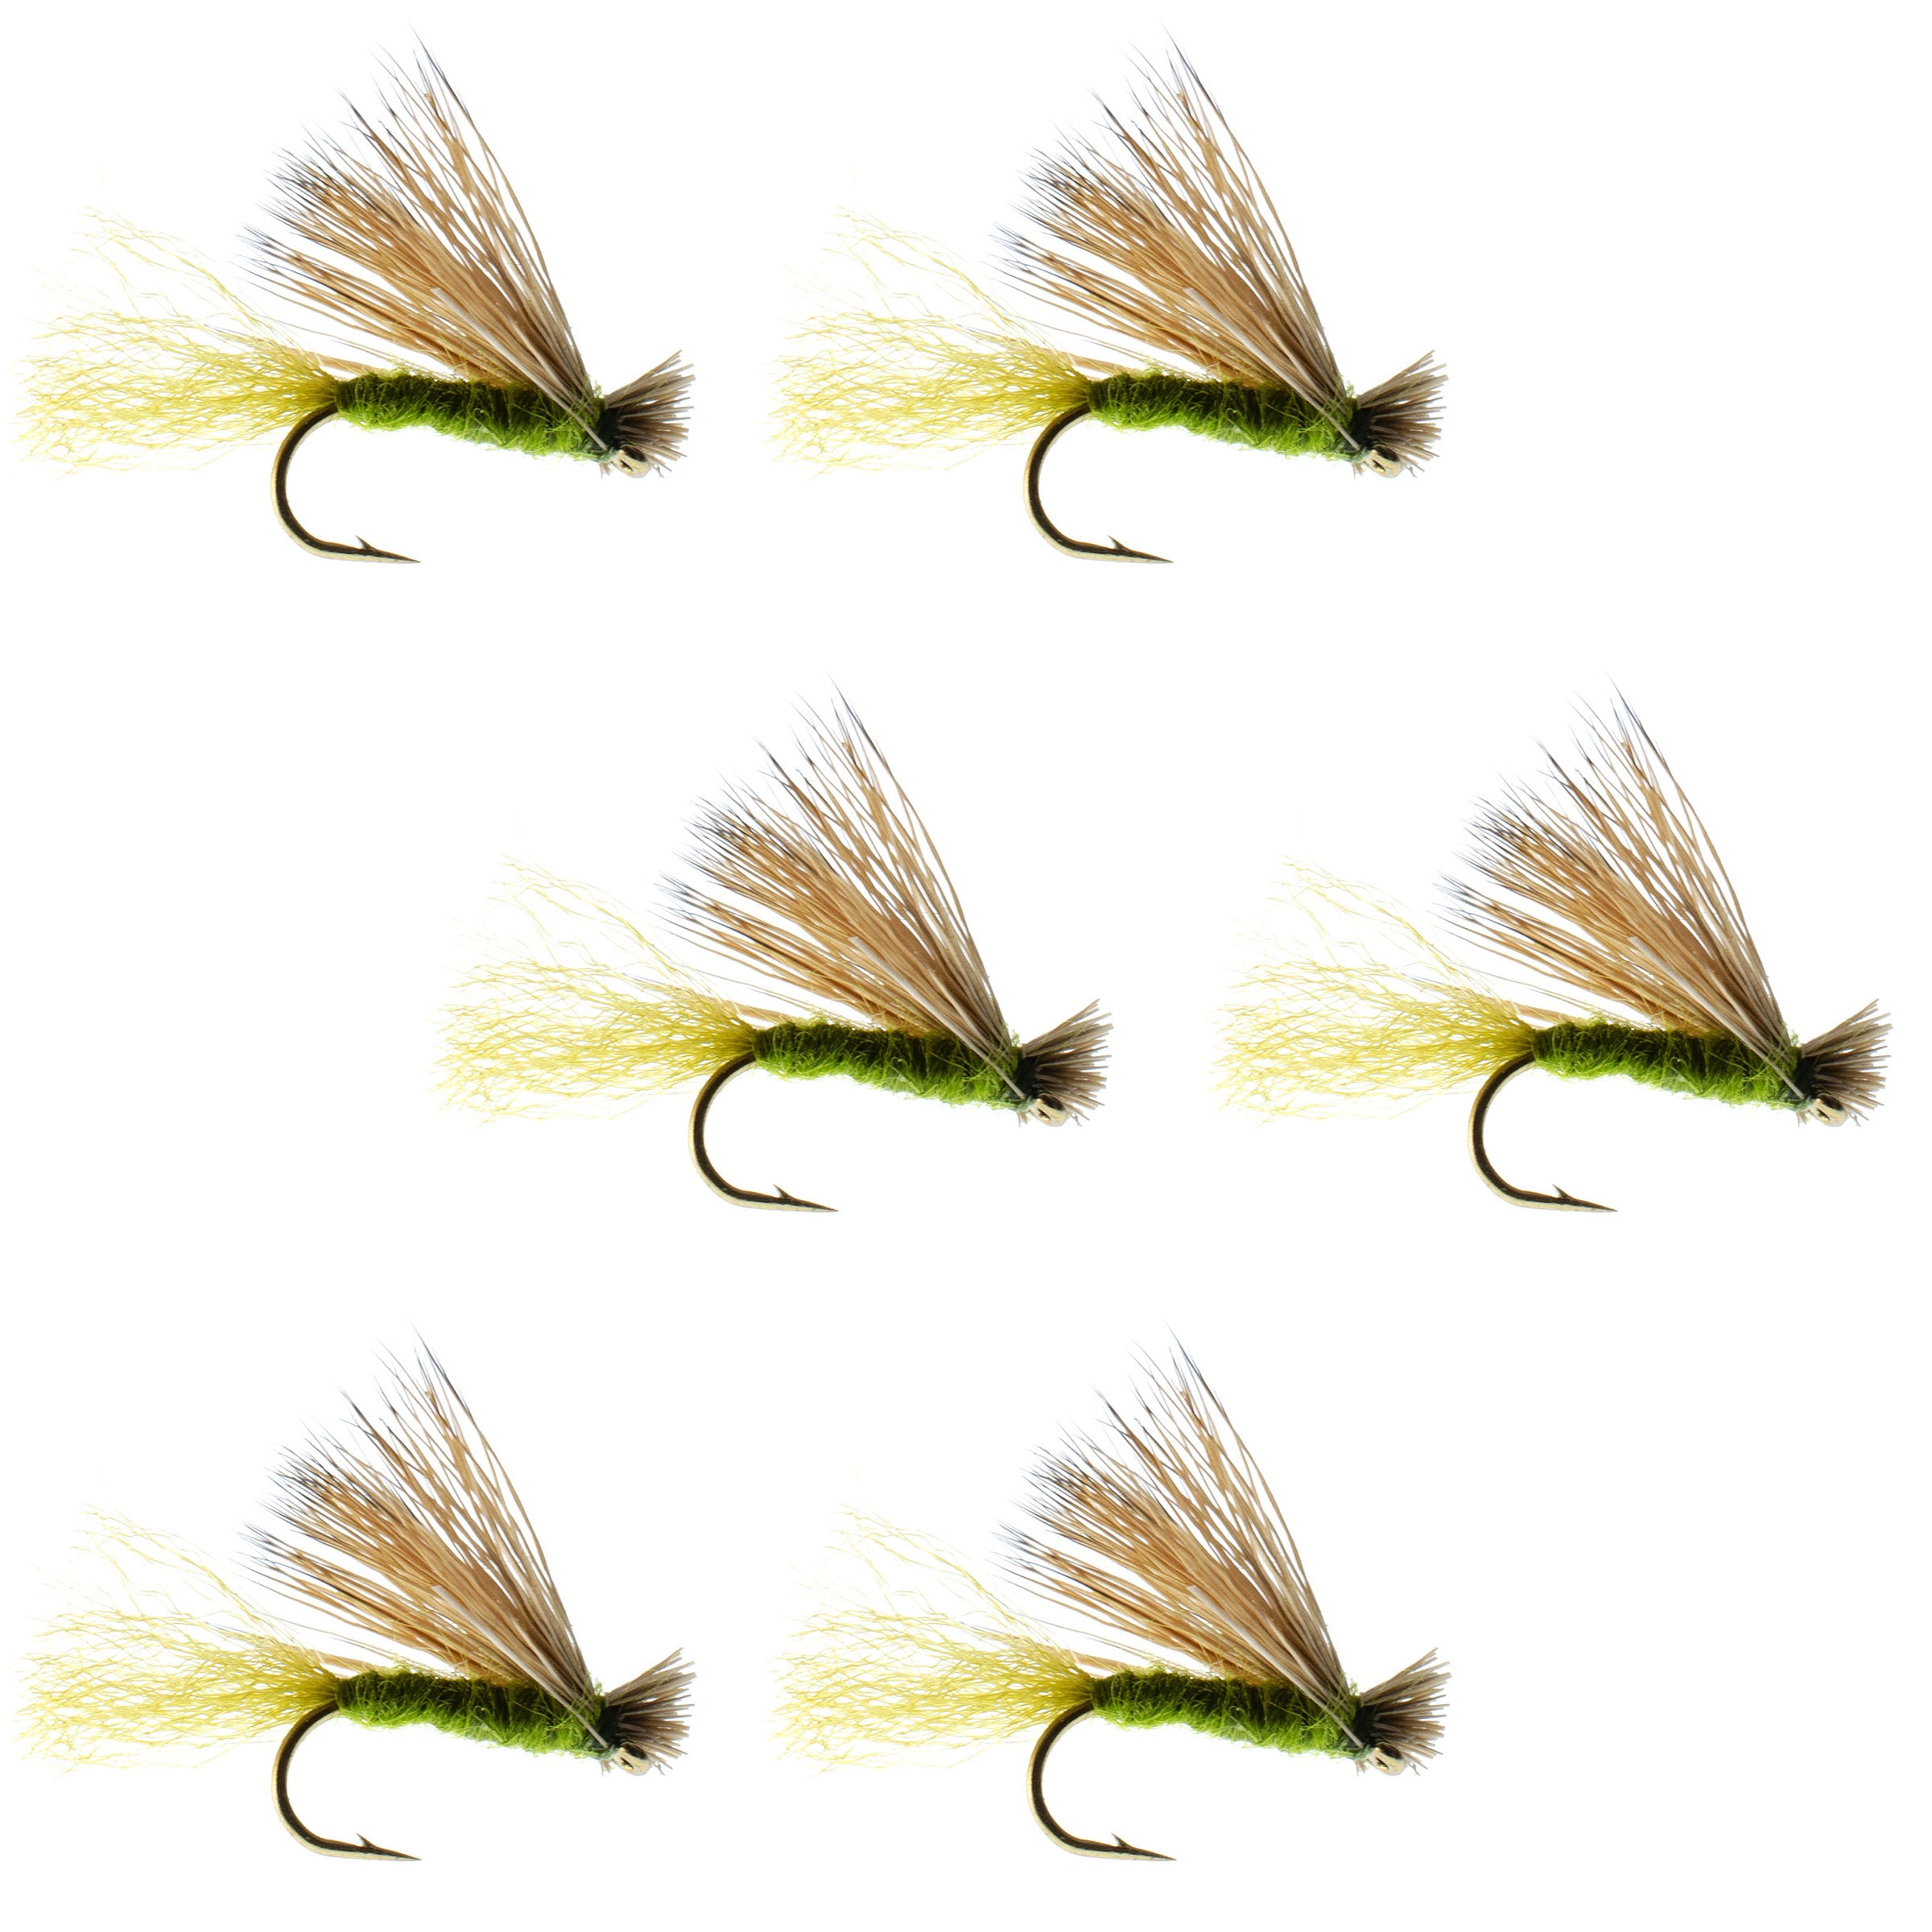 Olive X Caddis Emerging Caddis Adult Trout Dry Fly - 6 Flies Hook Size 18